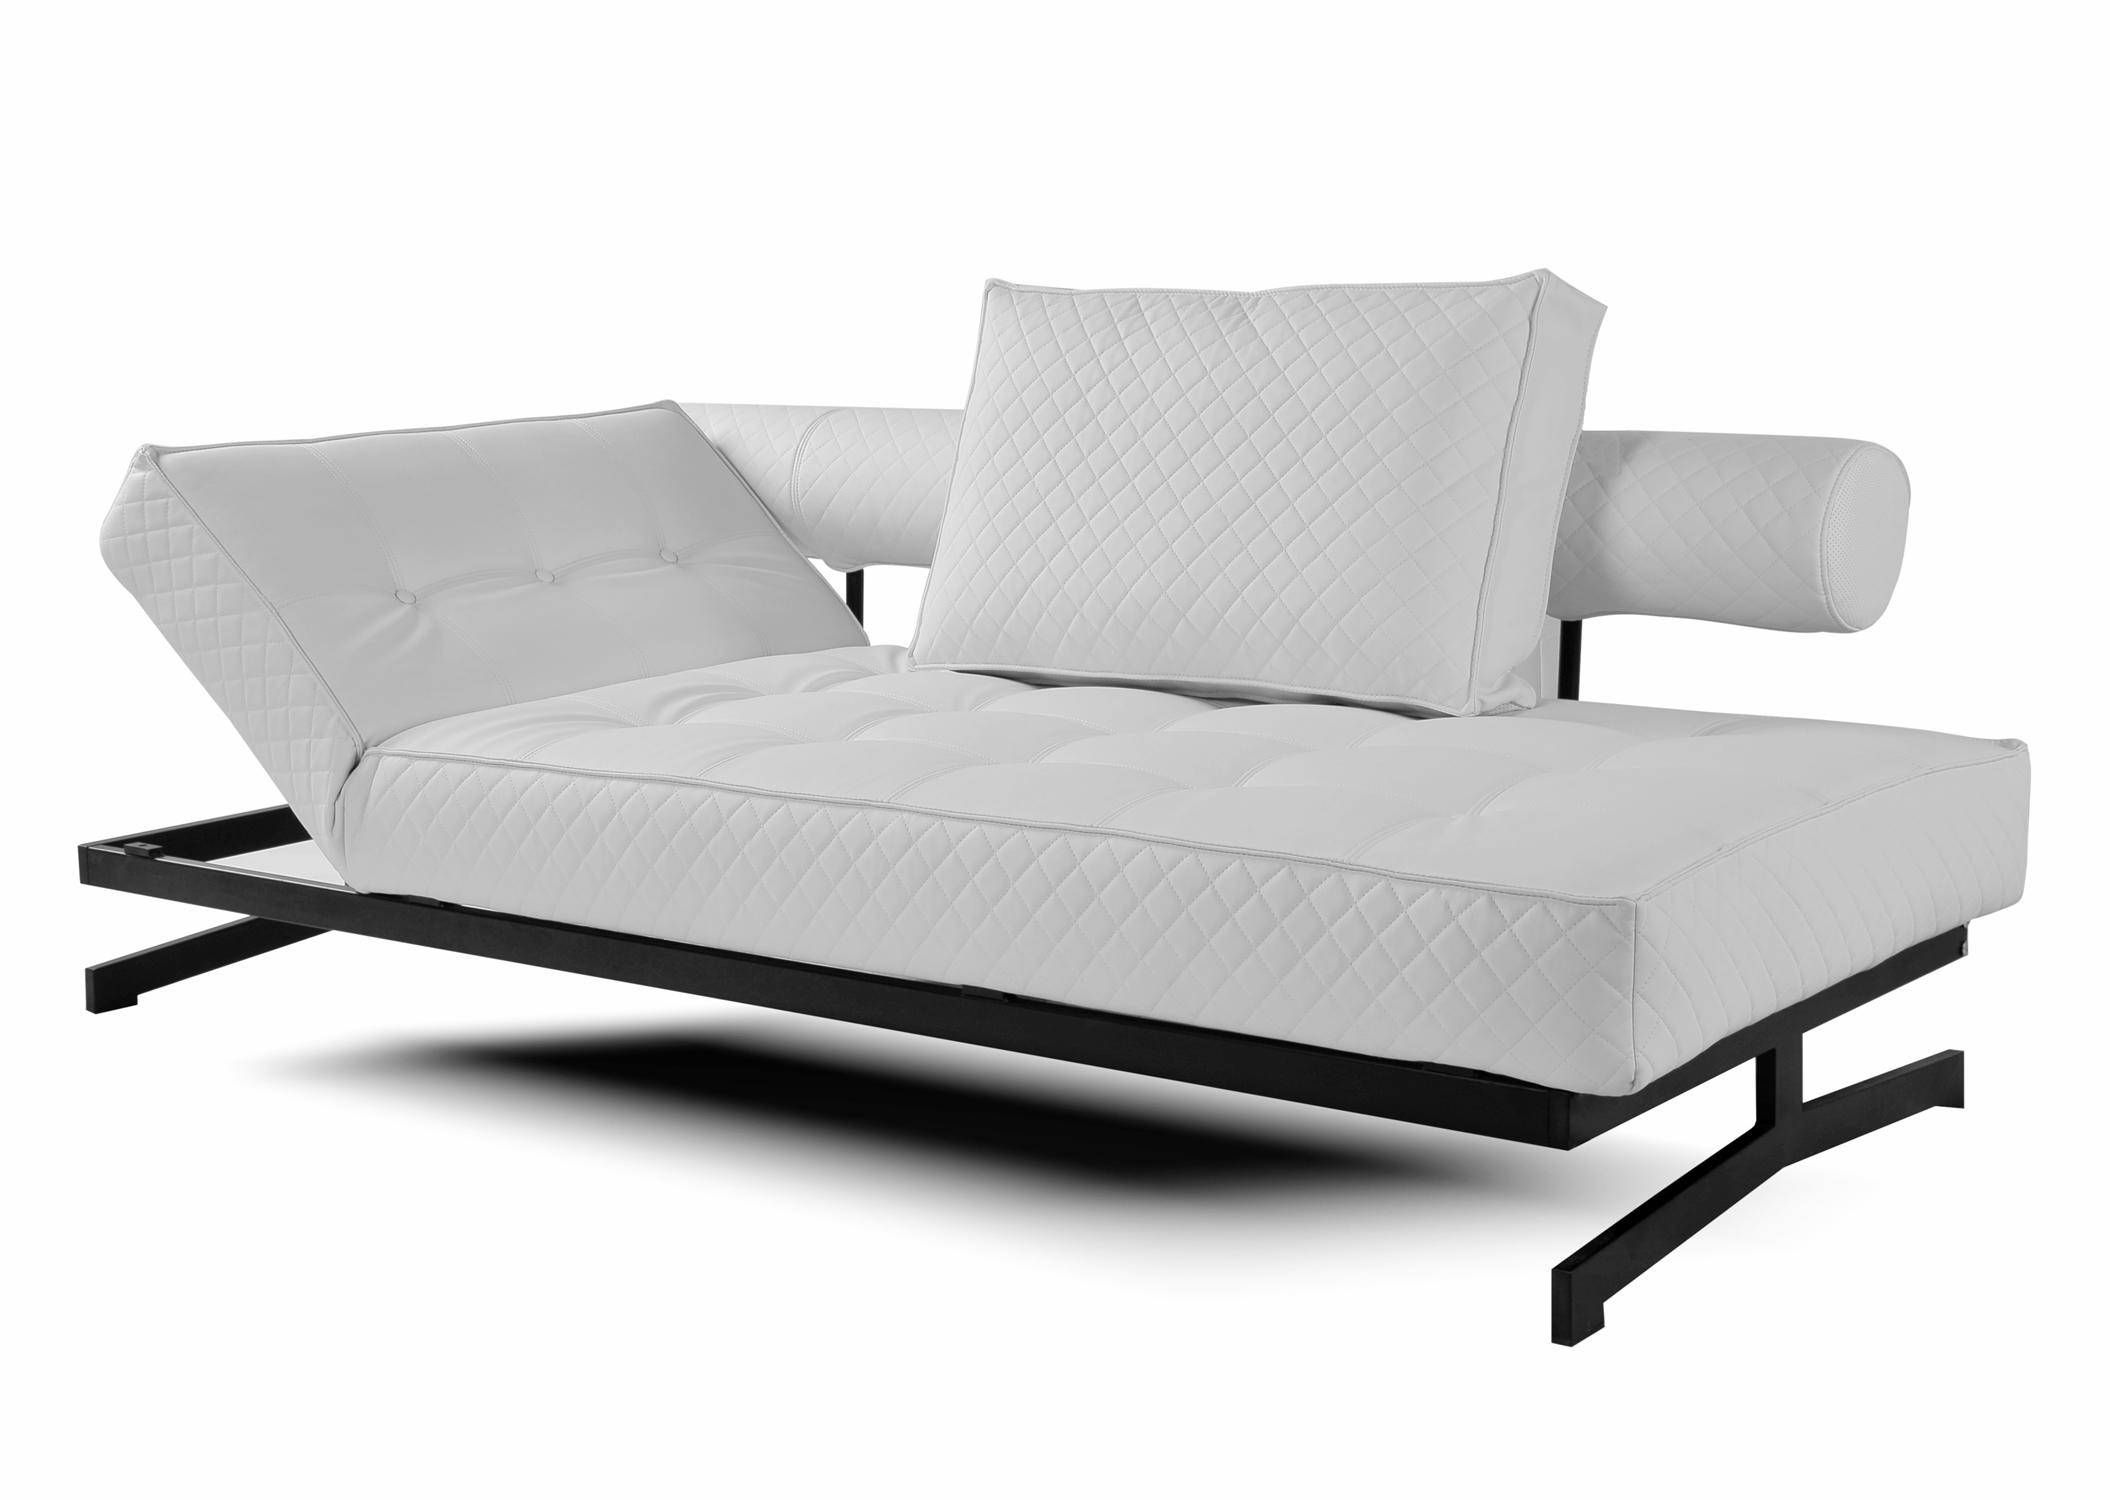 10 Beds That Look Like Sofas | Carehouse Intended For Euro Sofas (View 15 of 15)